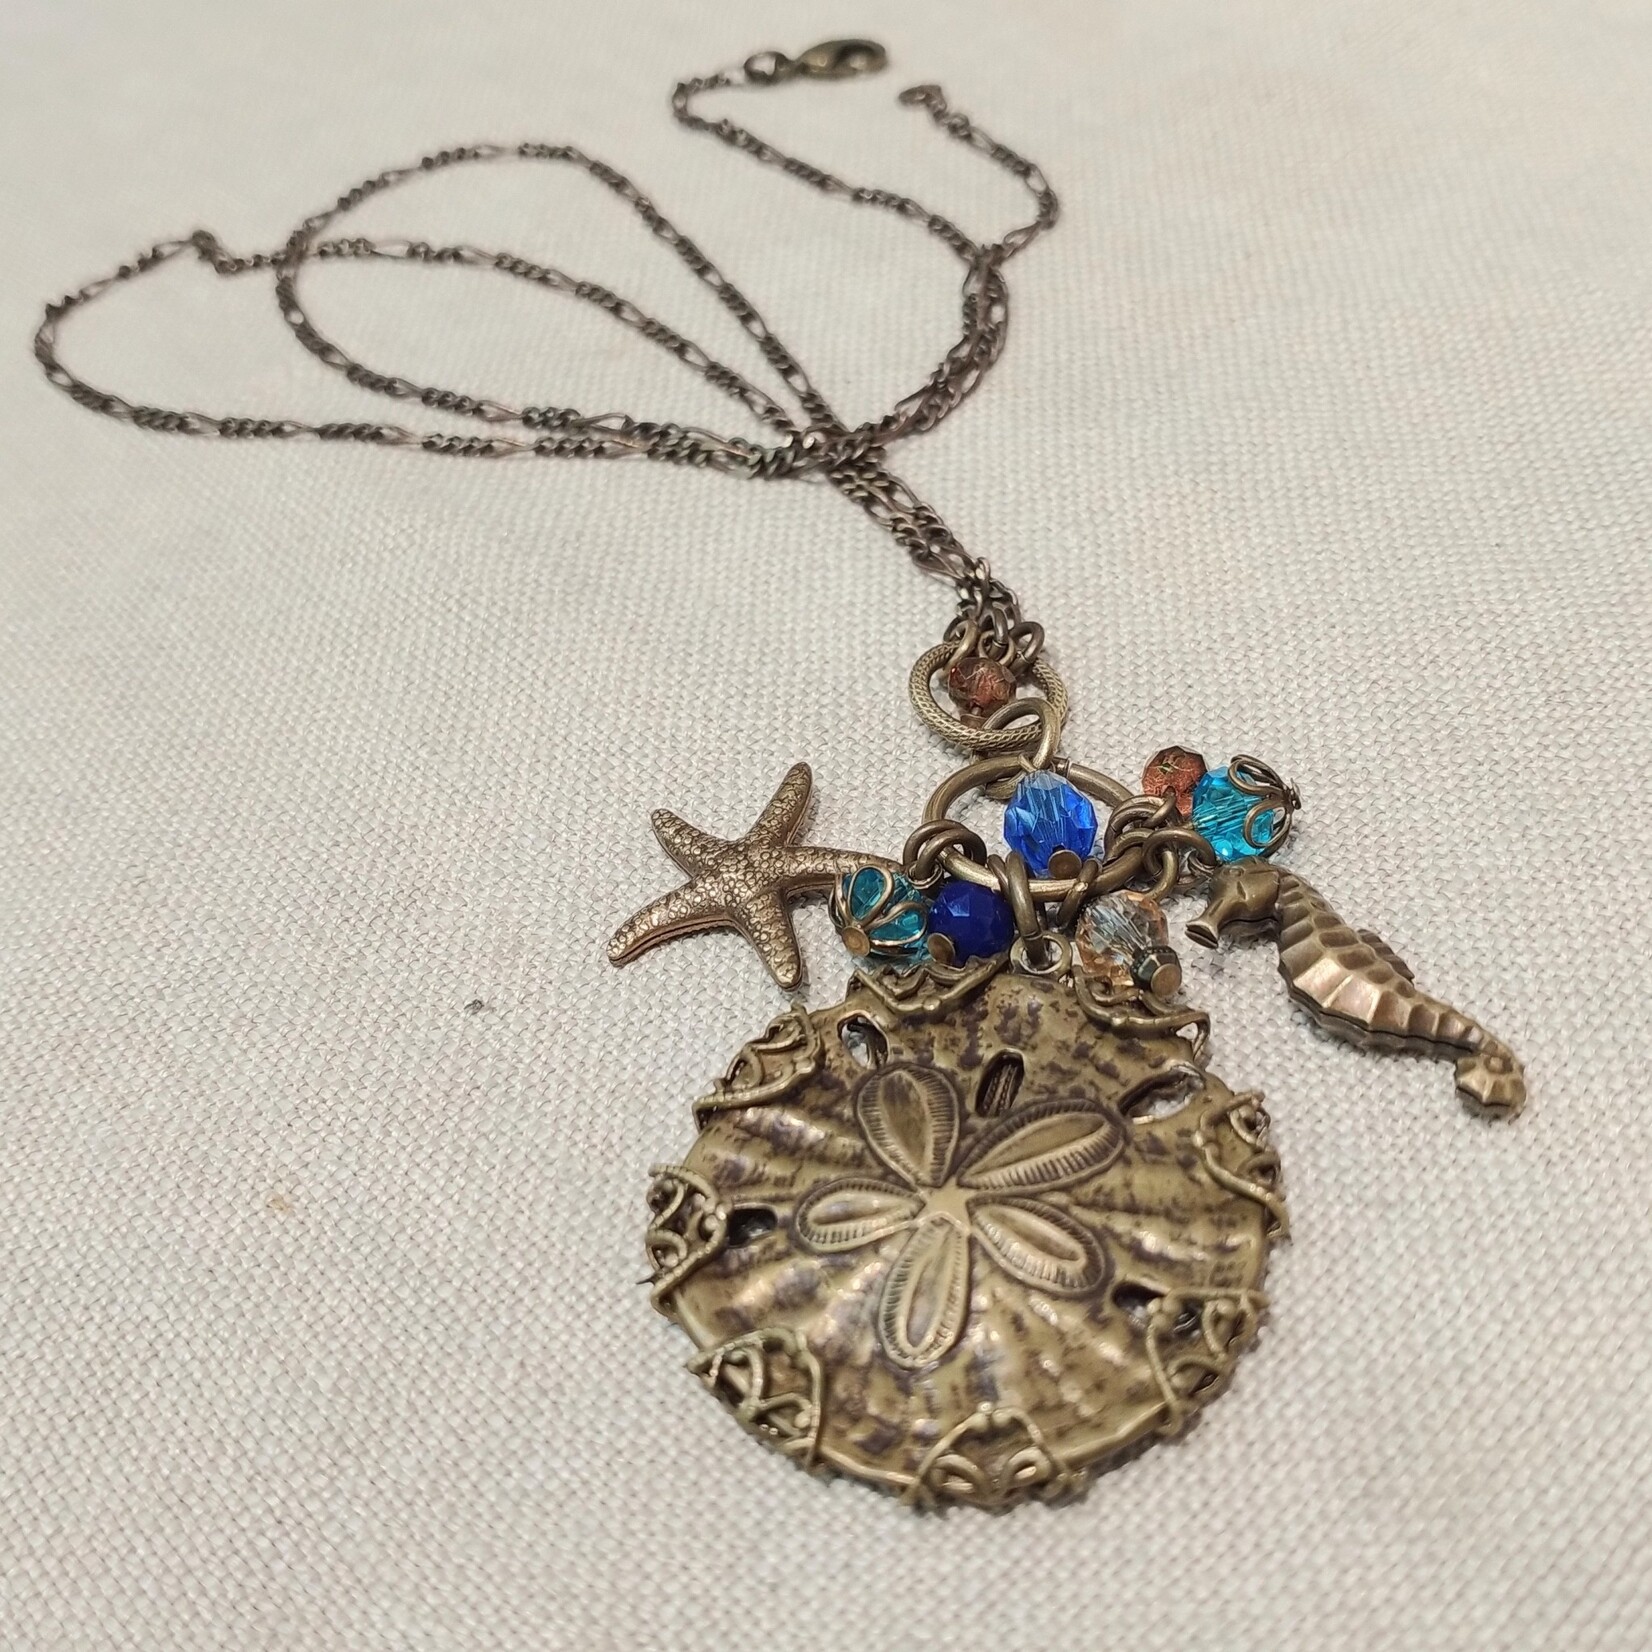 Beachcomber Necklace - Ready to wear